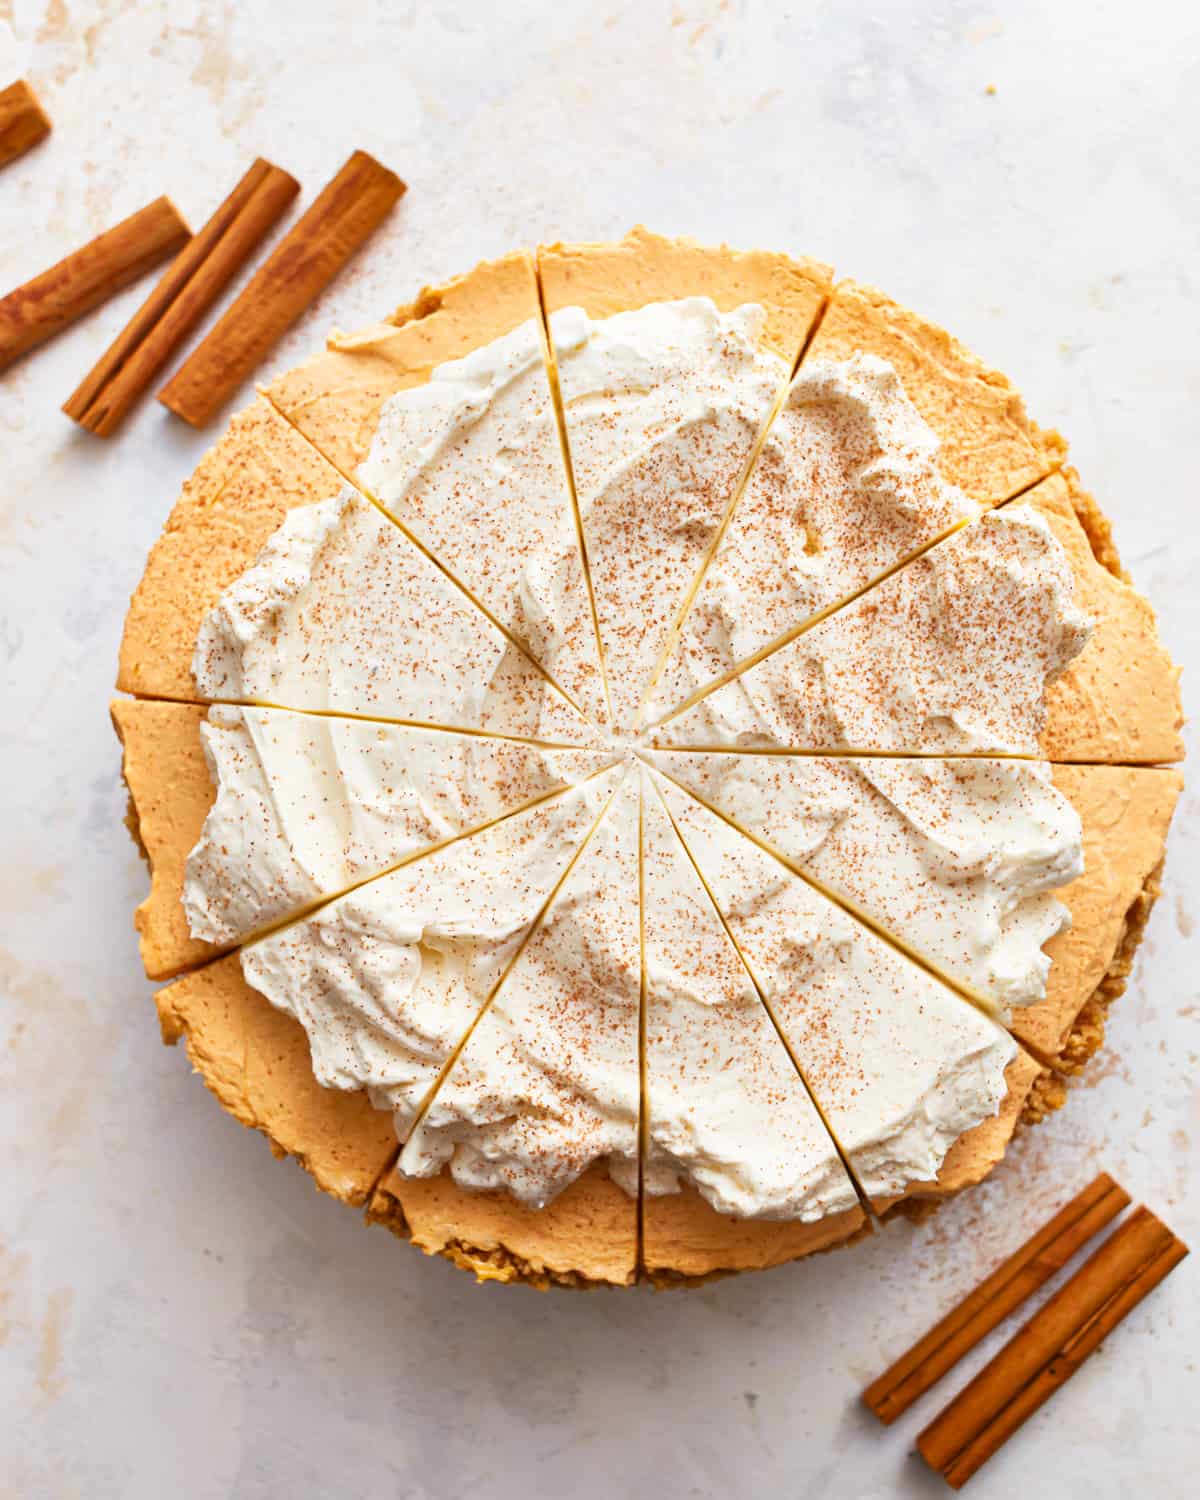 A whole no bake pumpkin cheesecake, cut into slices, topped with whipped topping, and surrounded by cinnamon sticks.